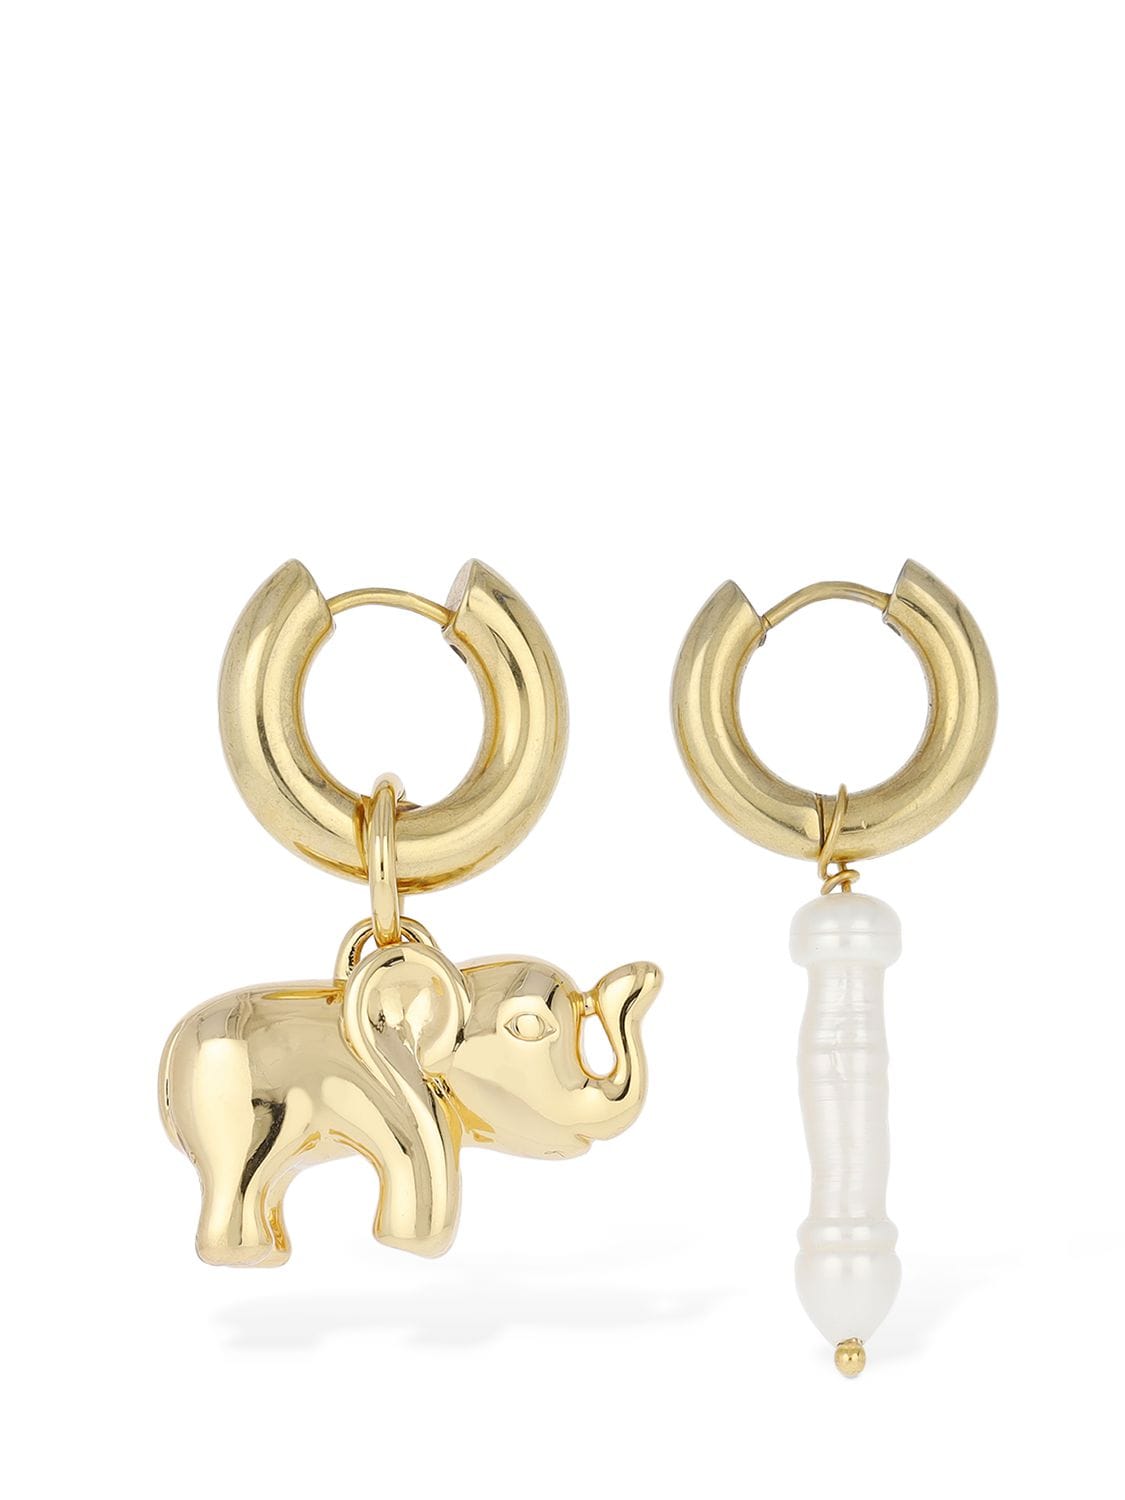 Image of Elephant & Pearl Mismatched Earrings